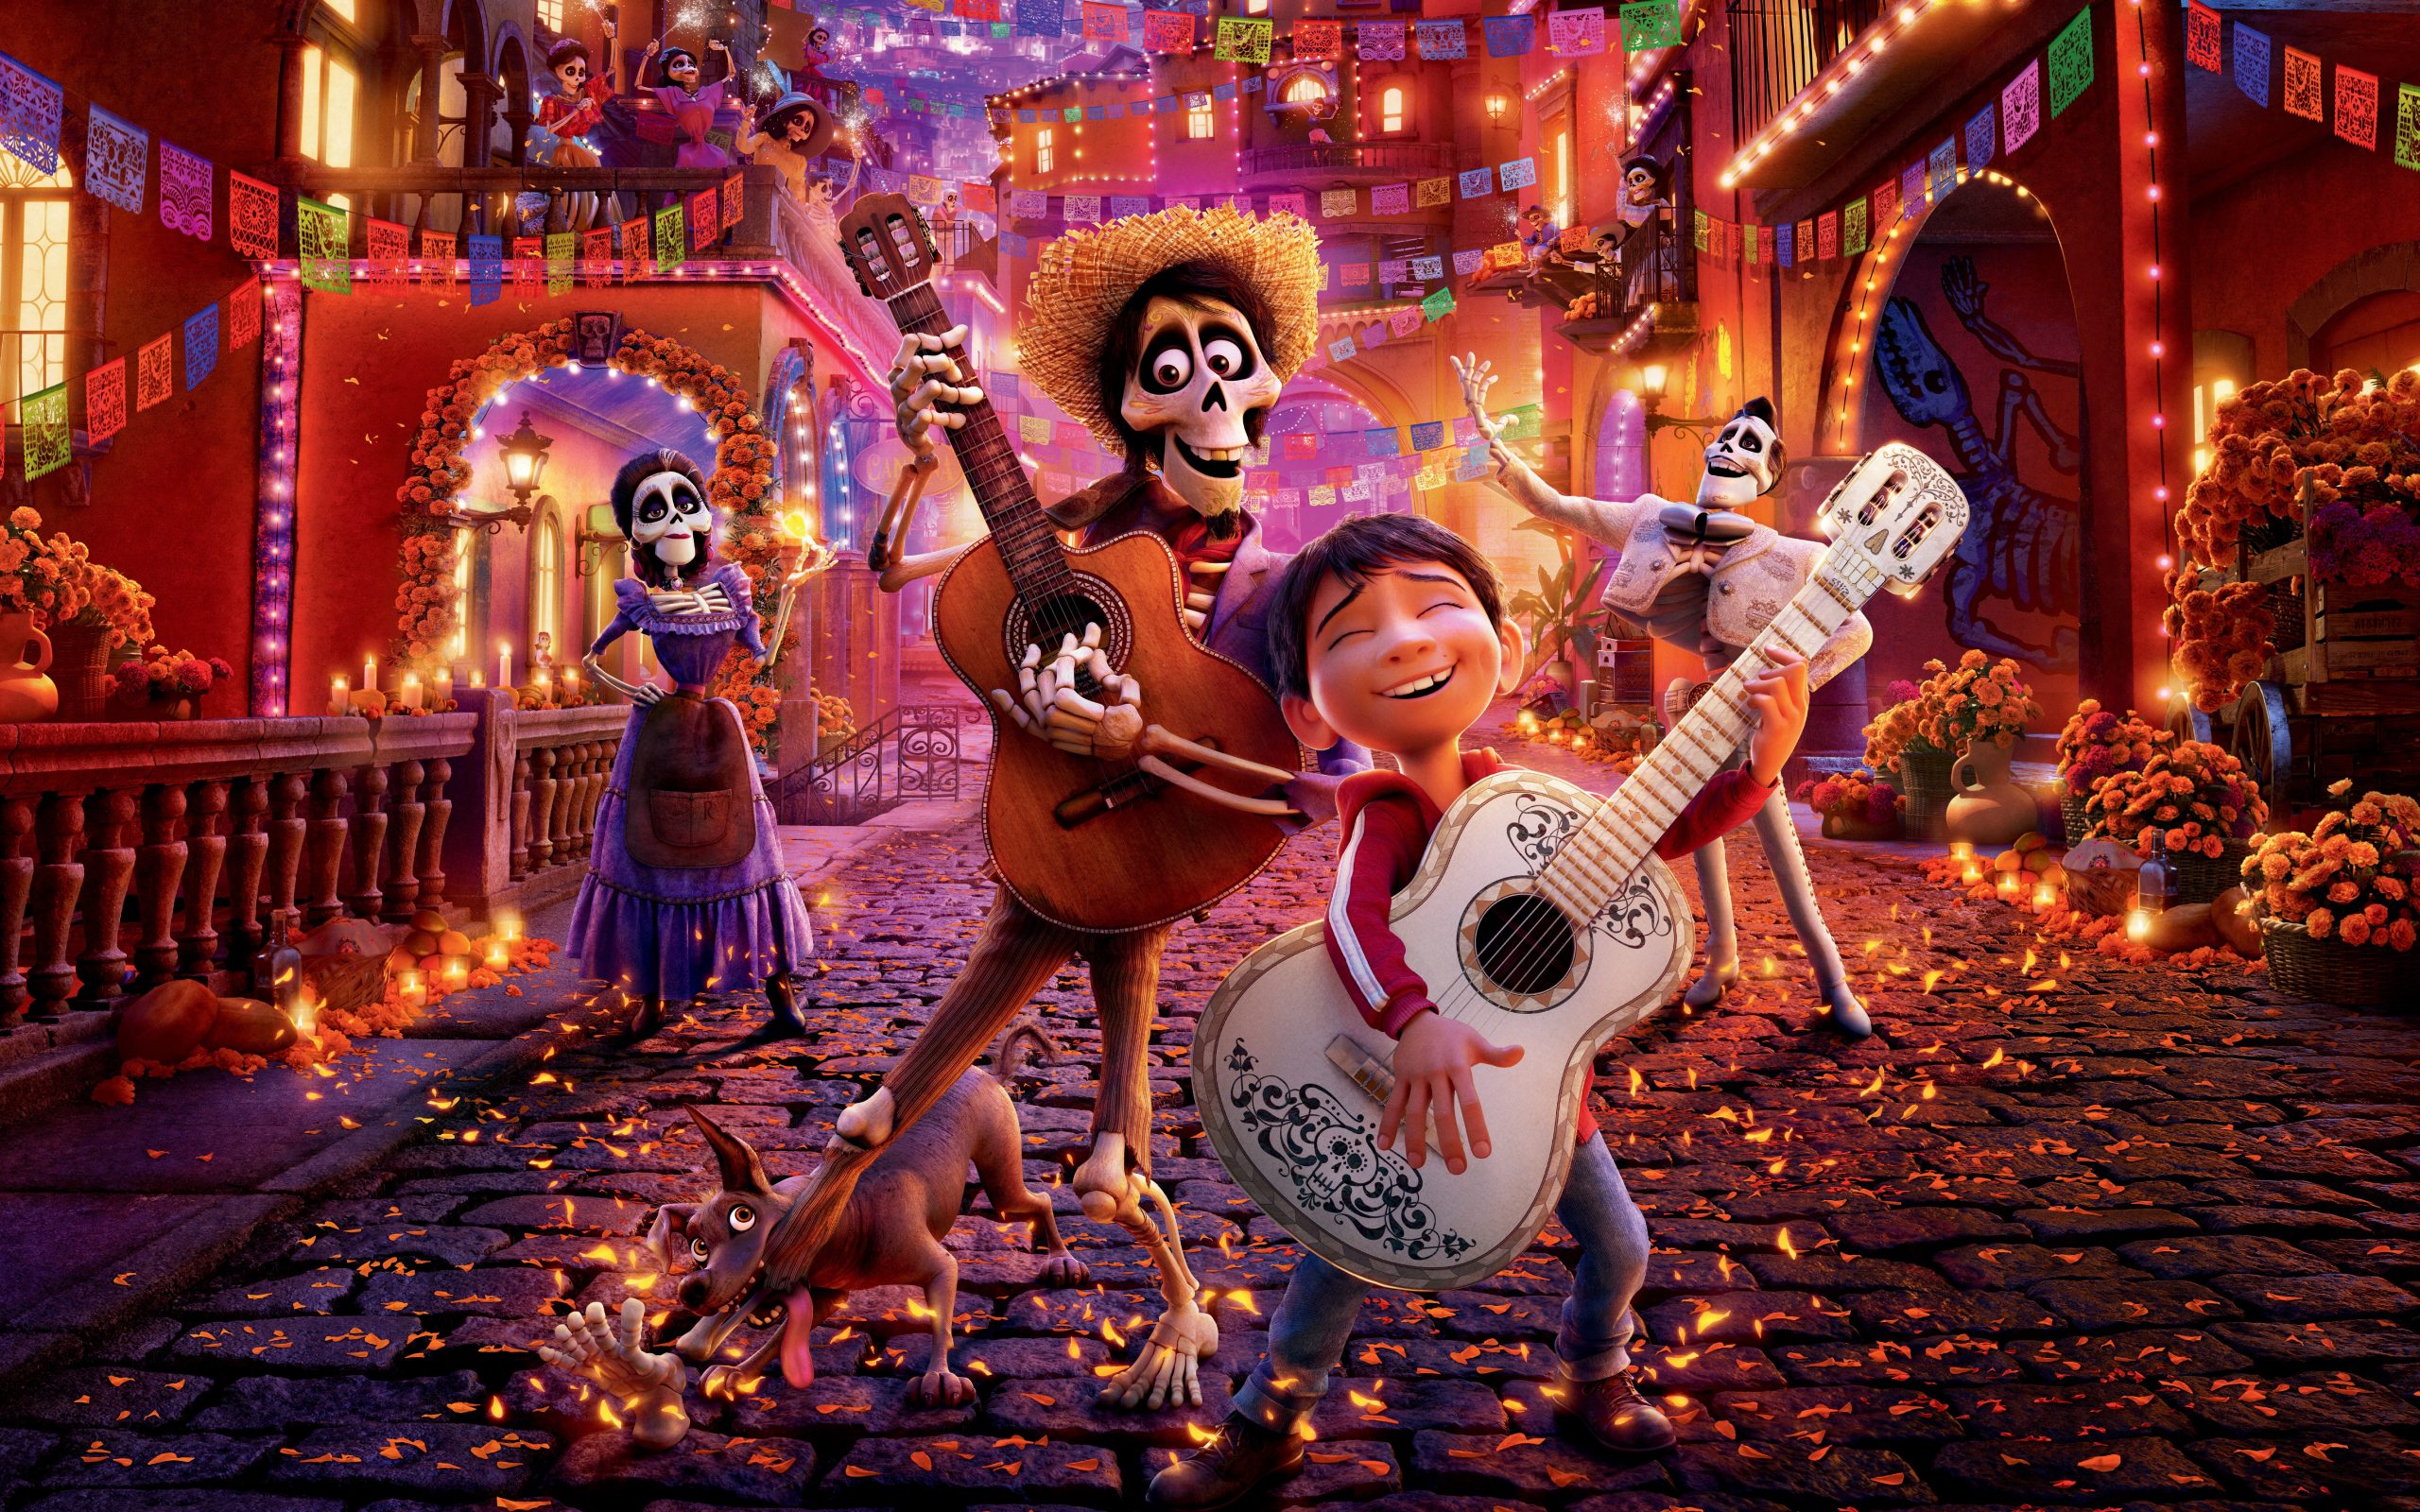 Coco Pixar Animation - Download hd wallpapers